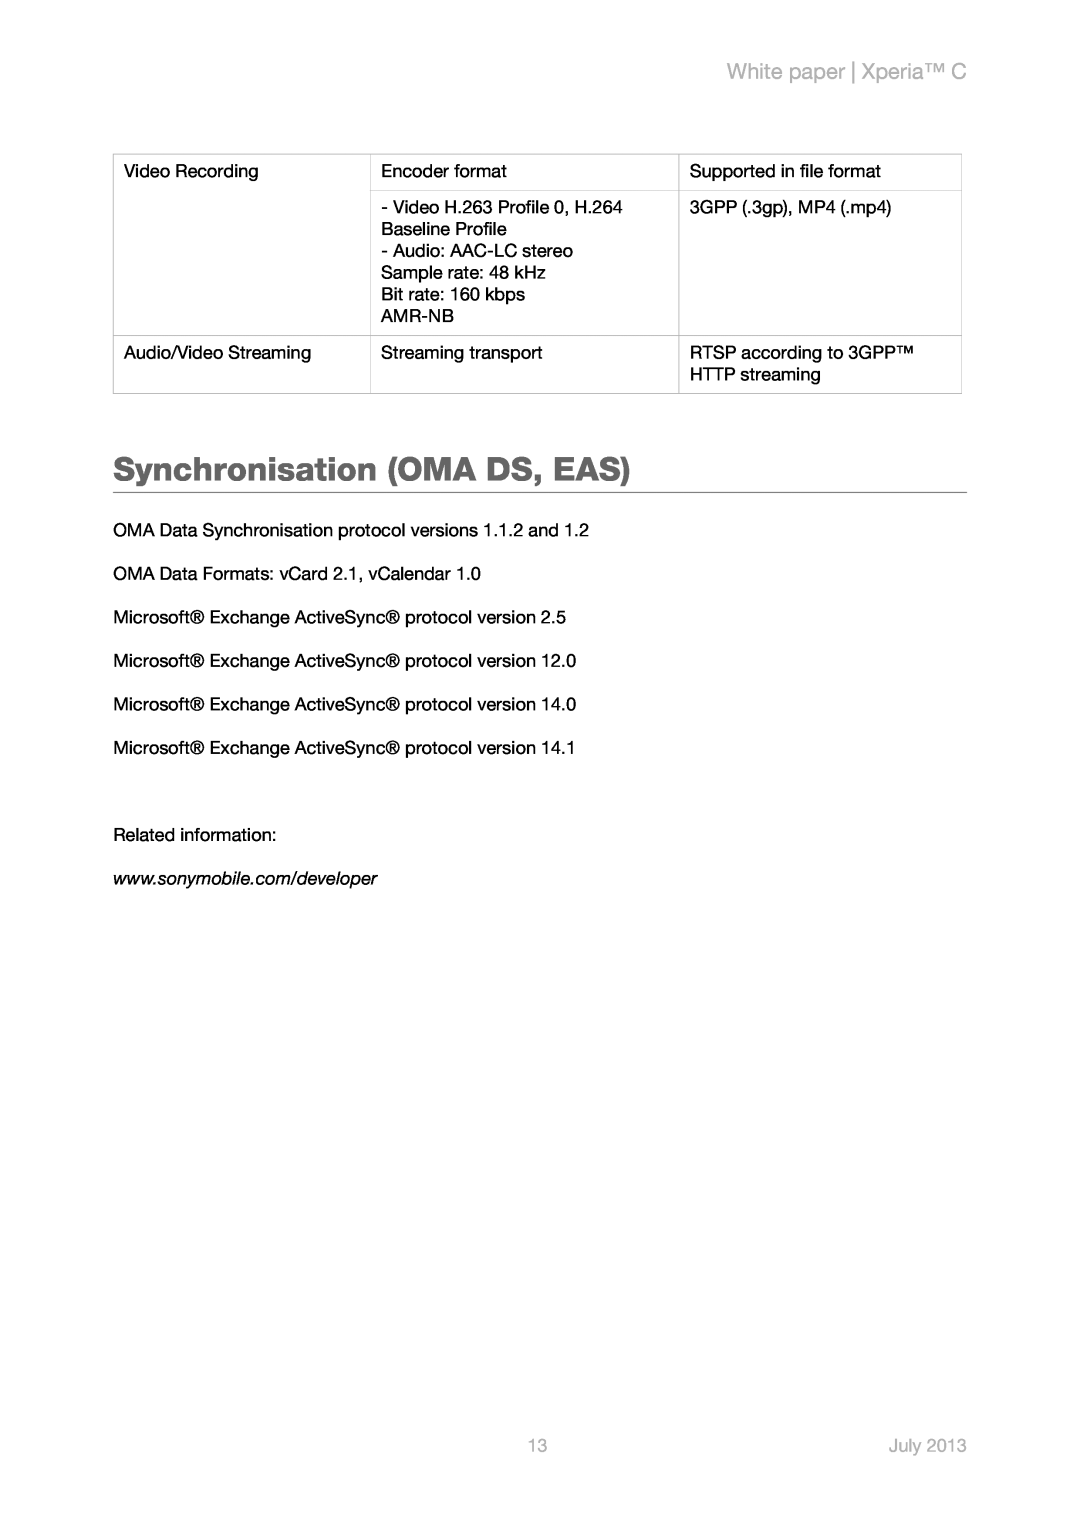 Sony s39h manual Synchronisation OMA DS, EAS, White paper Xperia C, July 